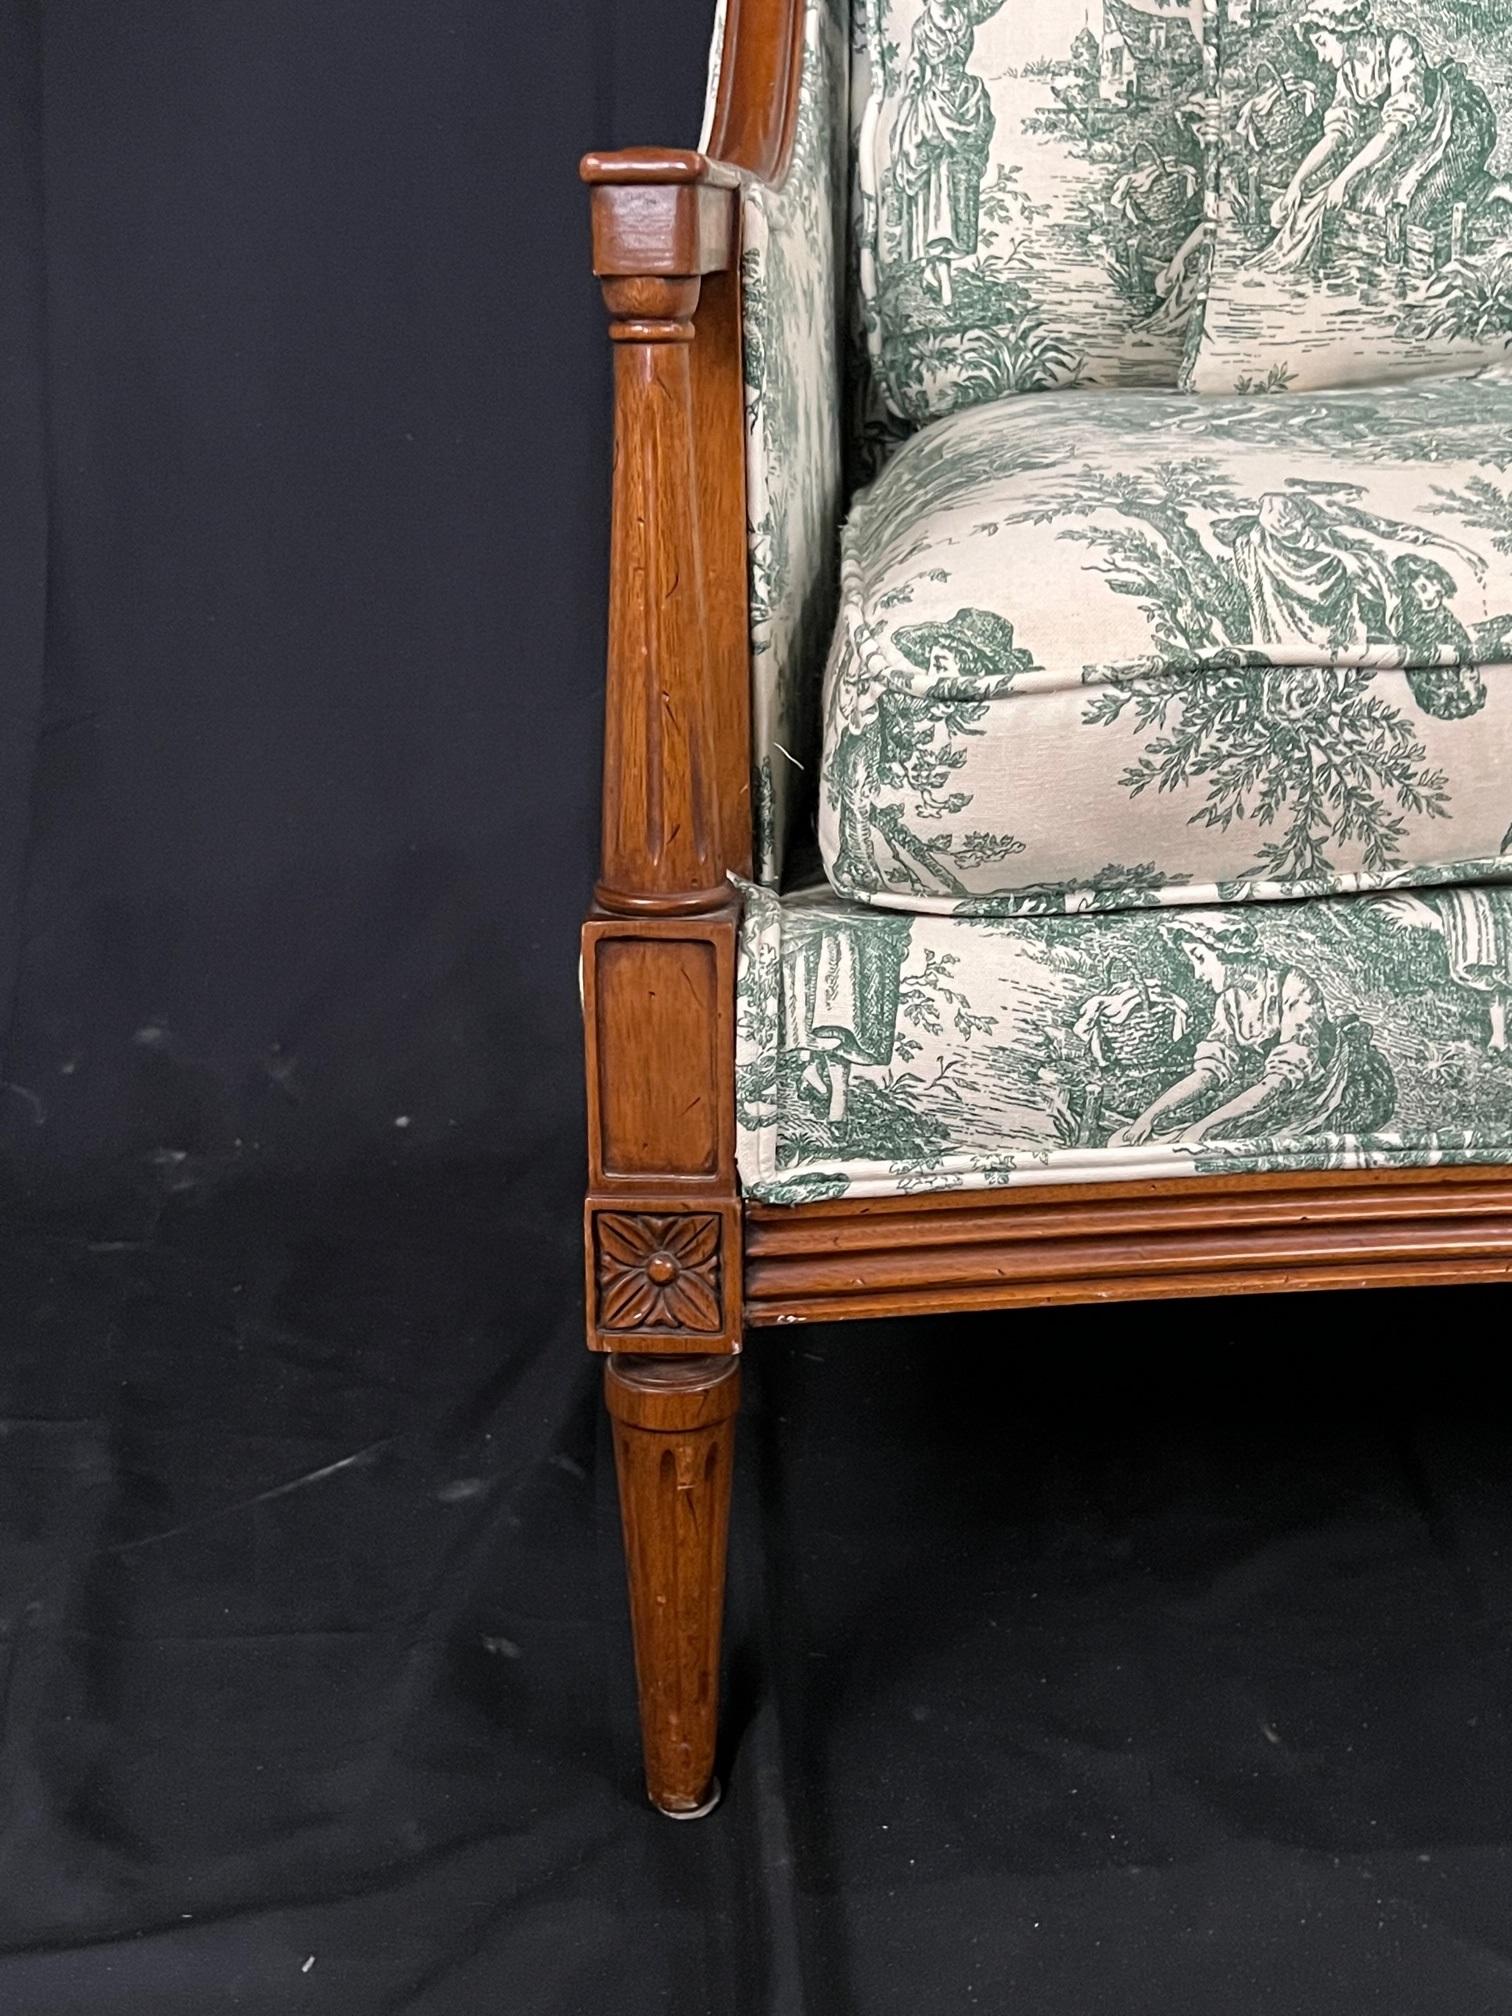 Newly upholstered mid 20th century Louis XVI style carved walnut sofa with columnal legs and ornamental details in corners. Single welting and down wrapped seat. Age appropriate patina to wood throughout, and a cushion clip under seat. Lovely green